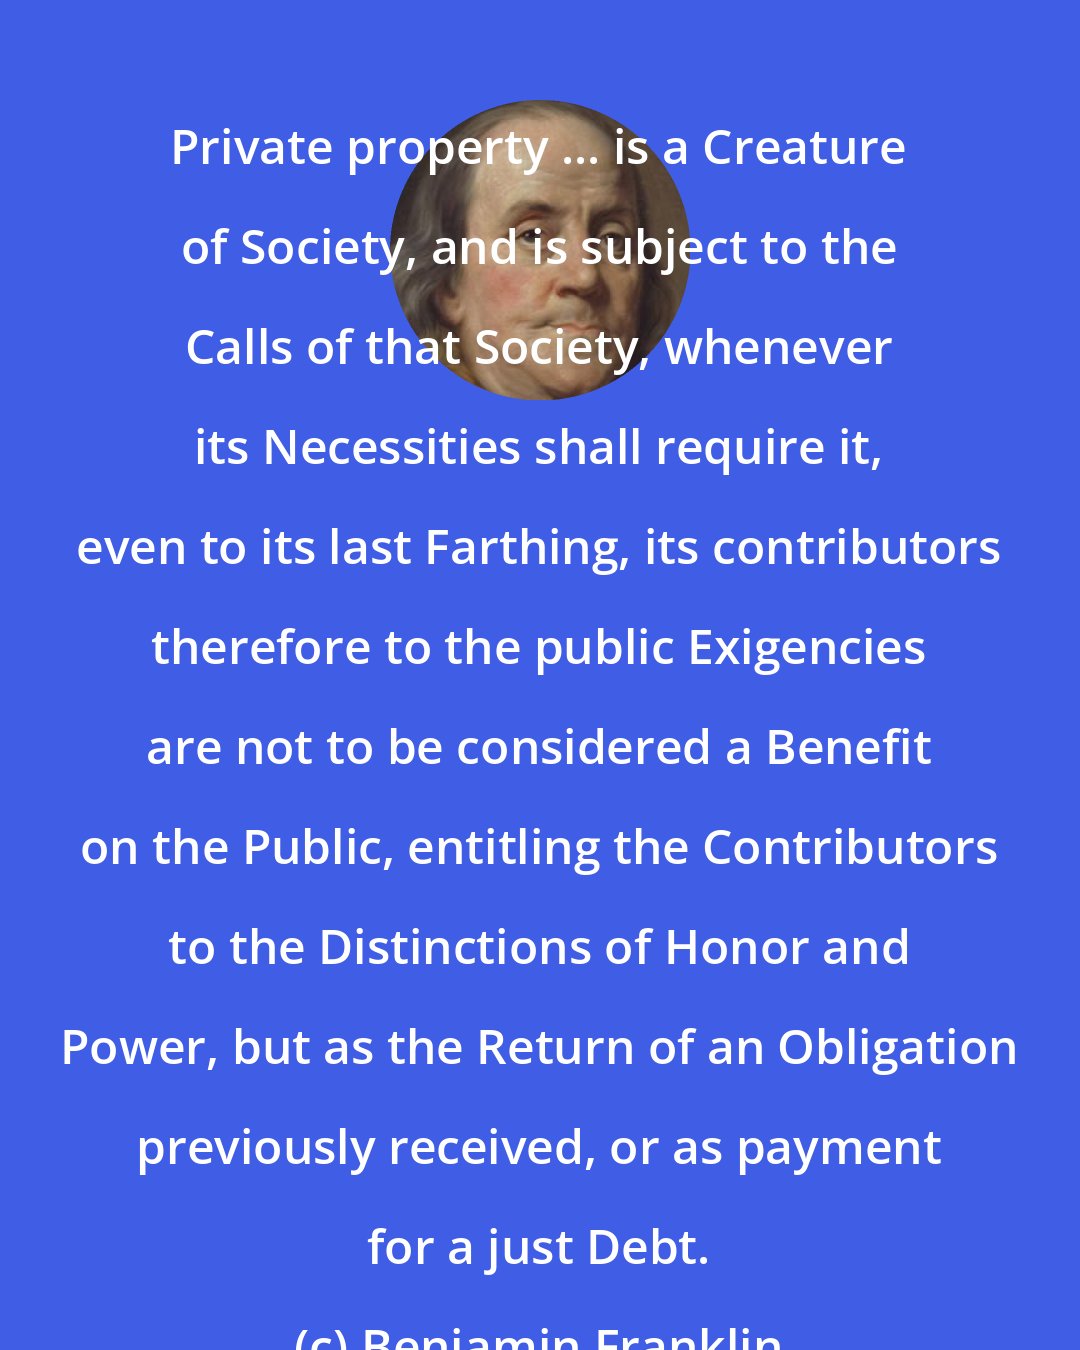 Benjamin Franklin: Private property ... is a Creature of Society, and is subject to the Calls of that Society, whenever its Necessities shall require it, even to its last Farthing, its contributors therefore to the public Exigencies are not to be considered a Benefit on the Public, entitling the Contributors to the Distinctions of Honor and Power, but as the Return of an Obligation previously received, or as payment for a just Debt.